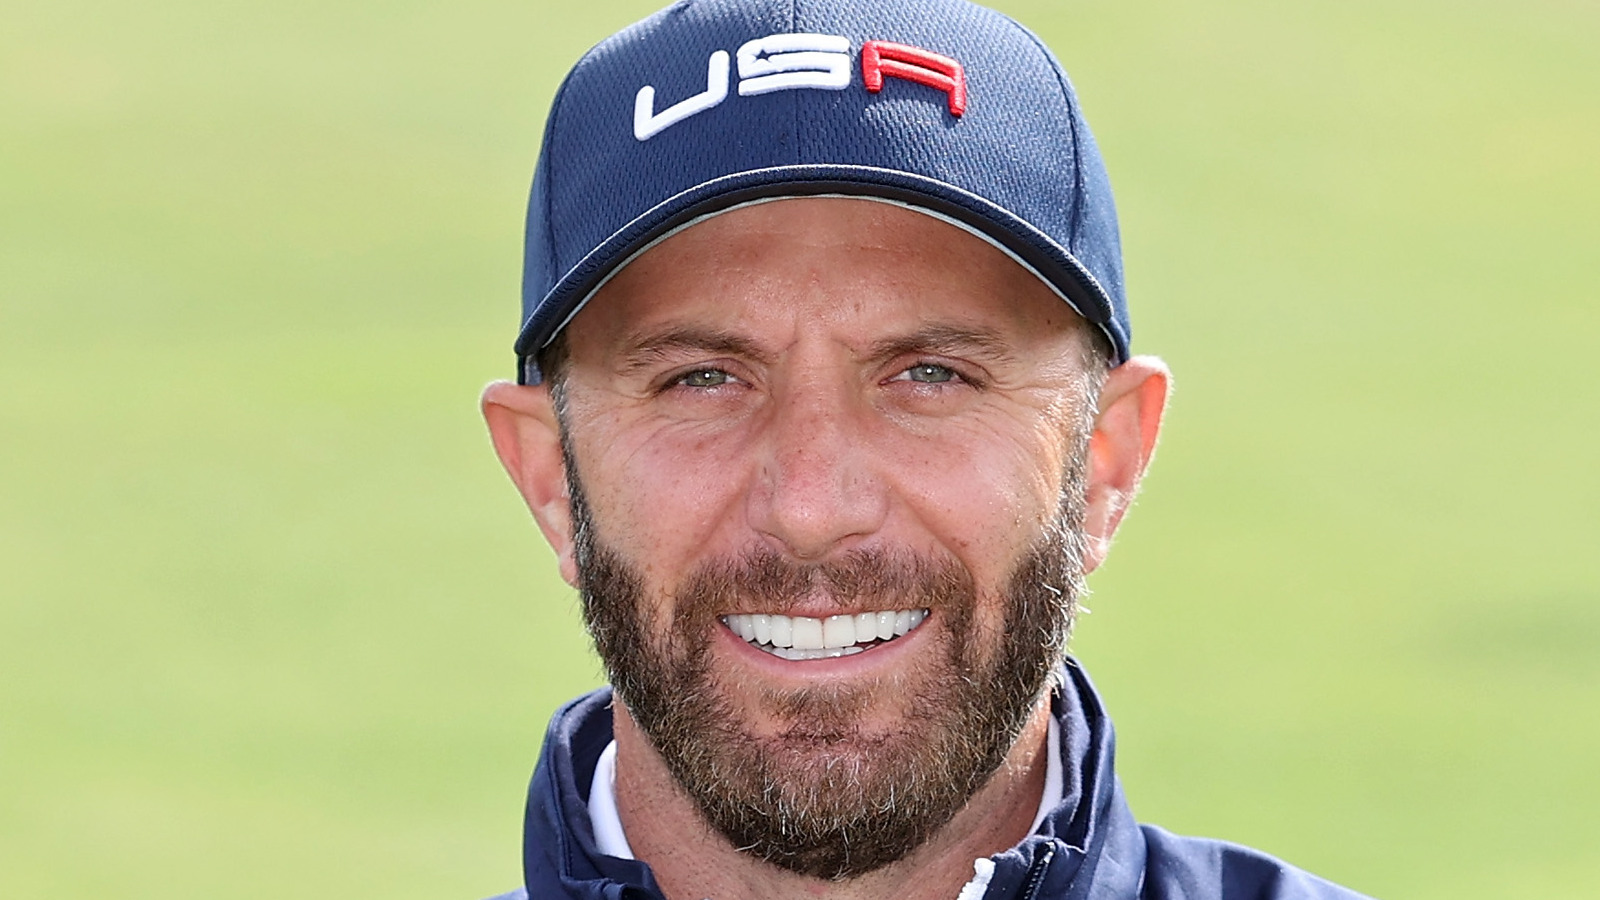 What We Know About Dustin Johnson's Troubled Past